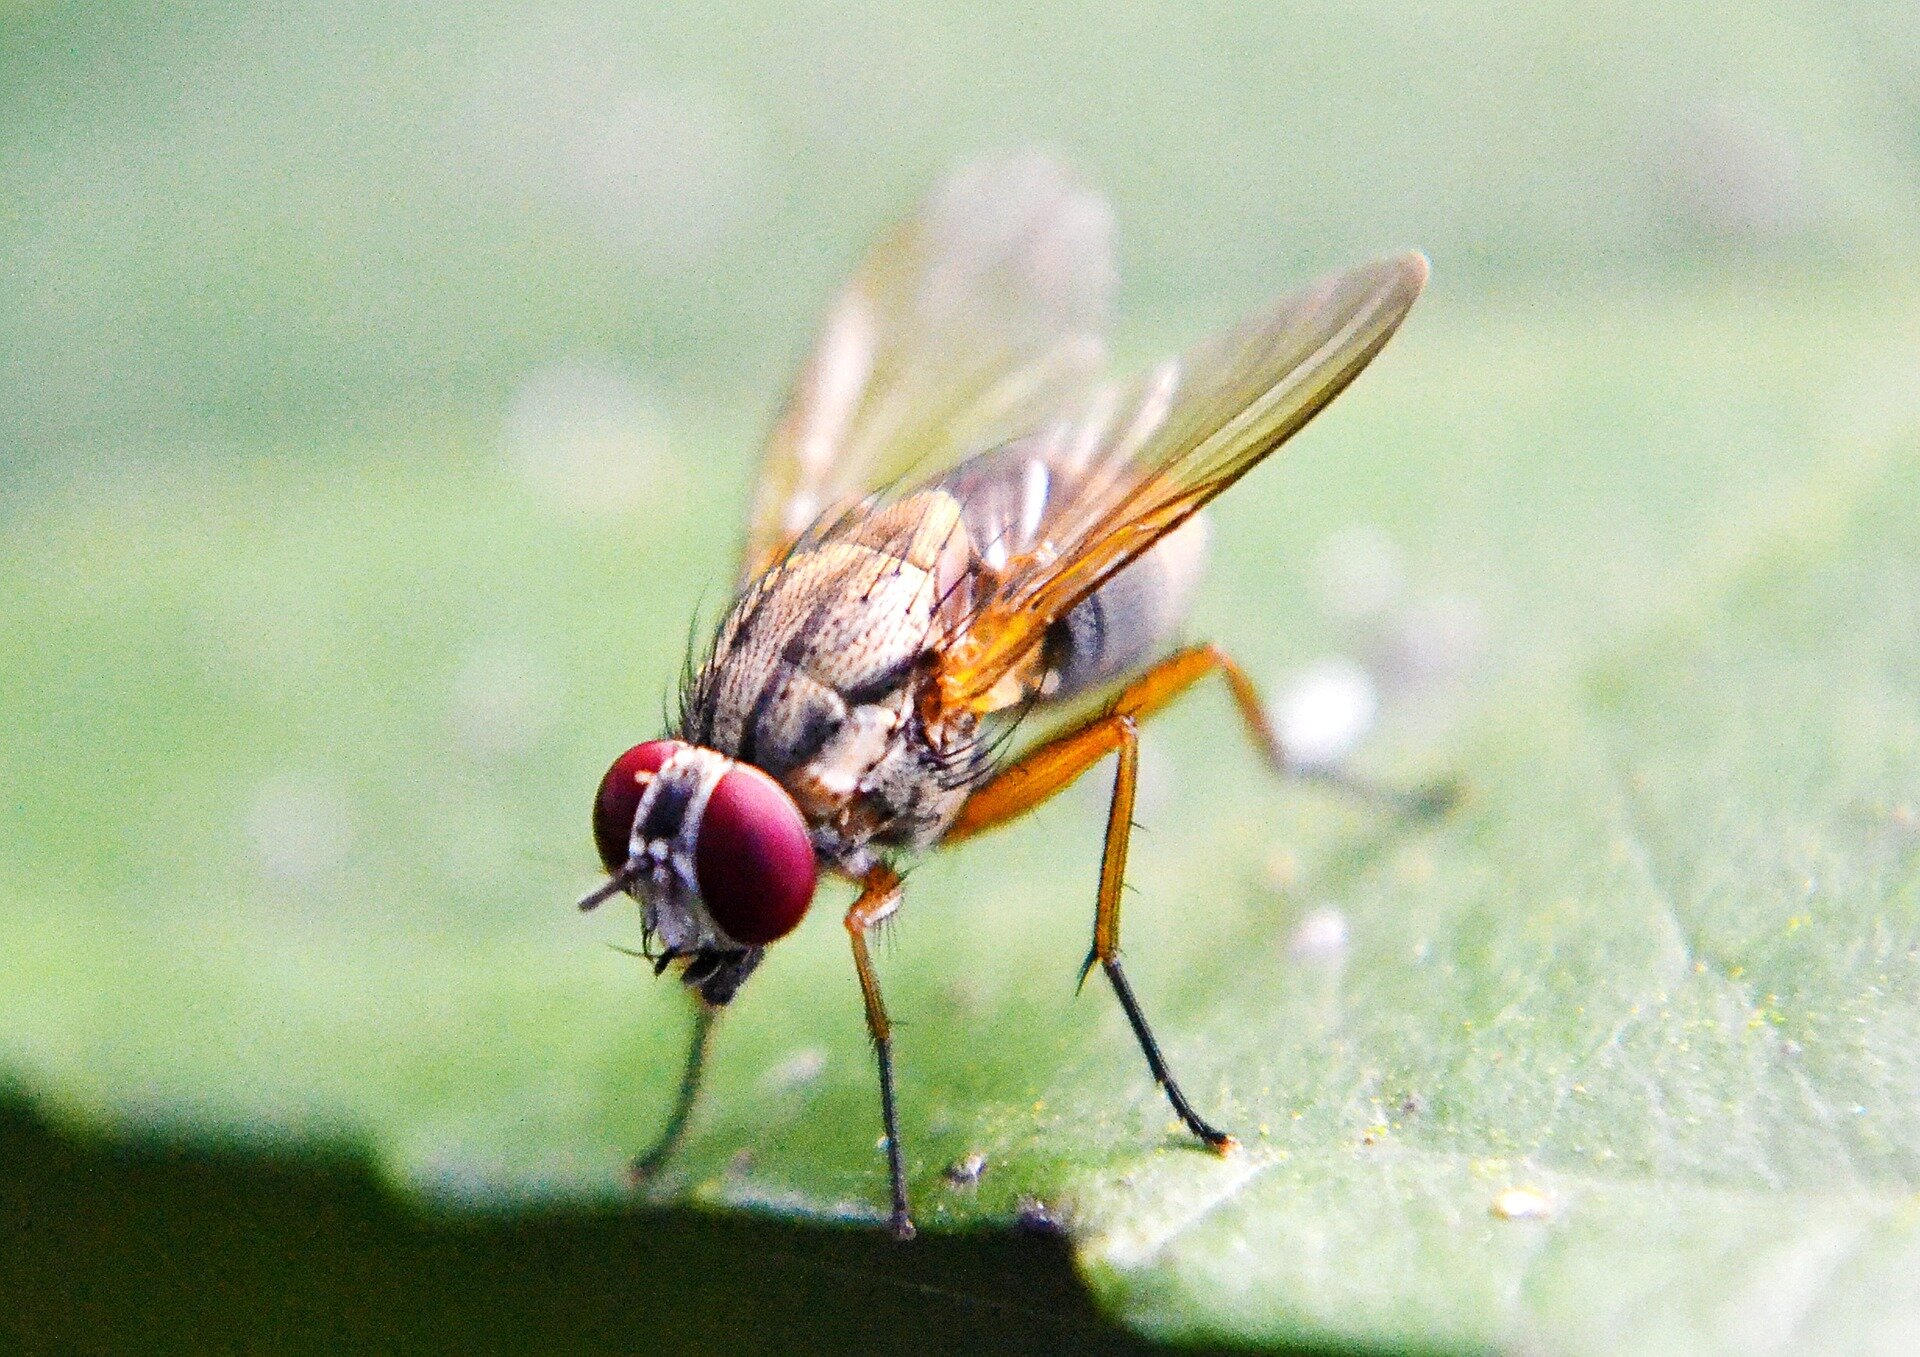 #Rhythmic eating pattern preserves fruit fly muscle function under obese conditions